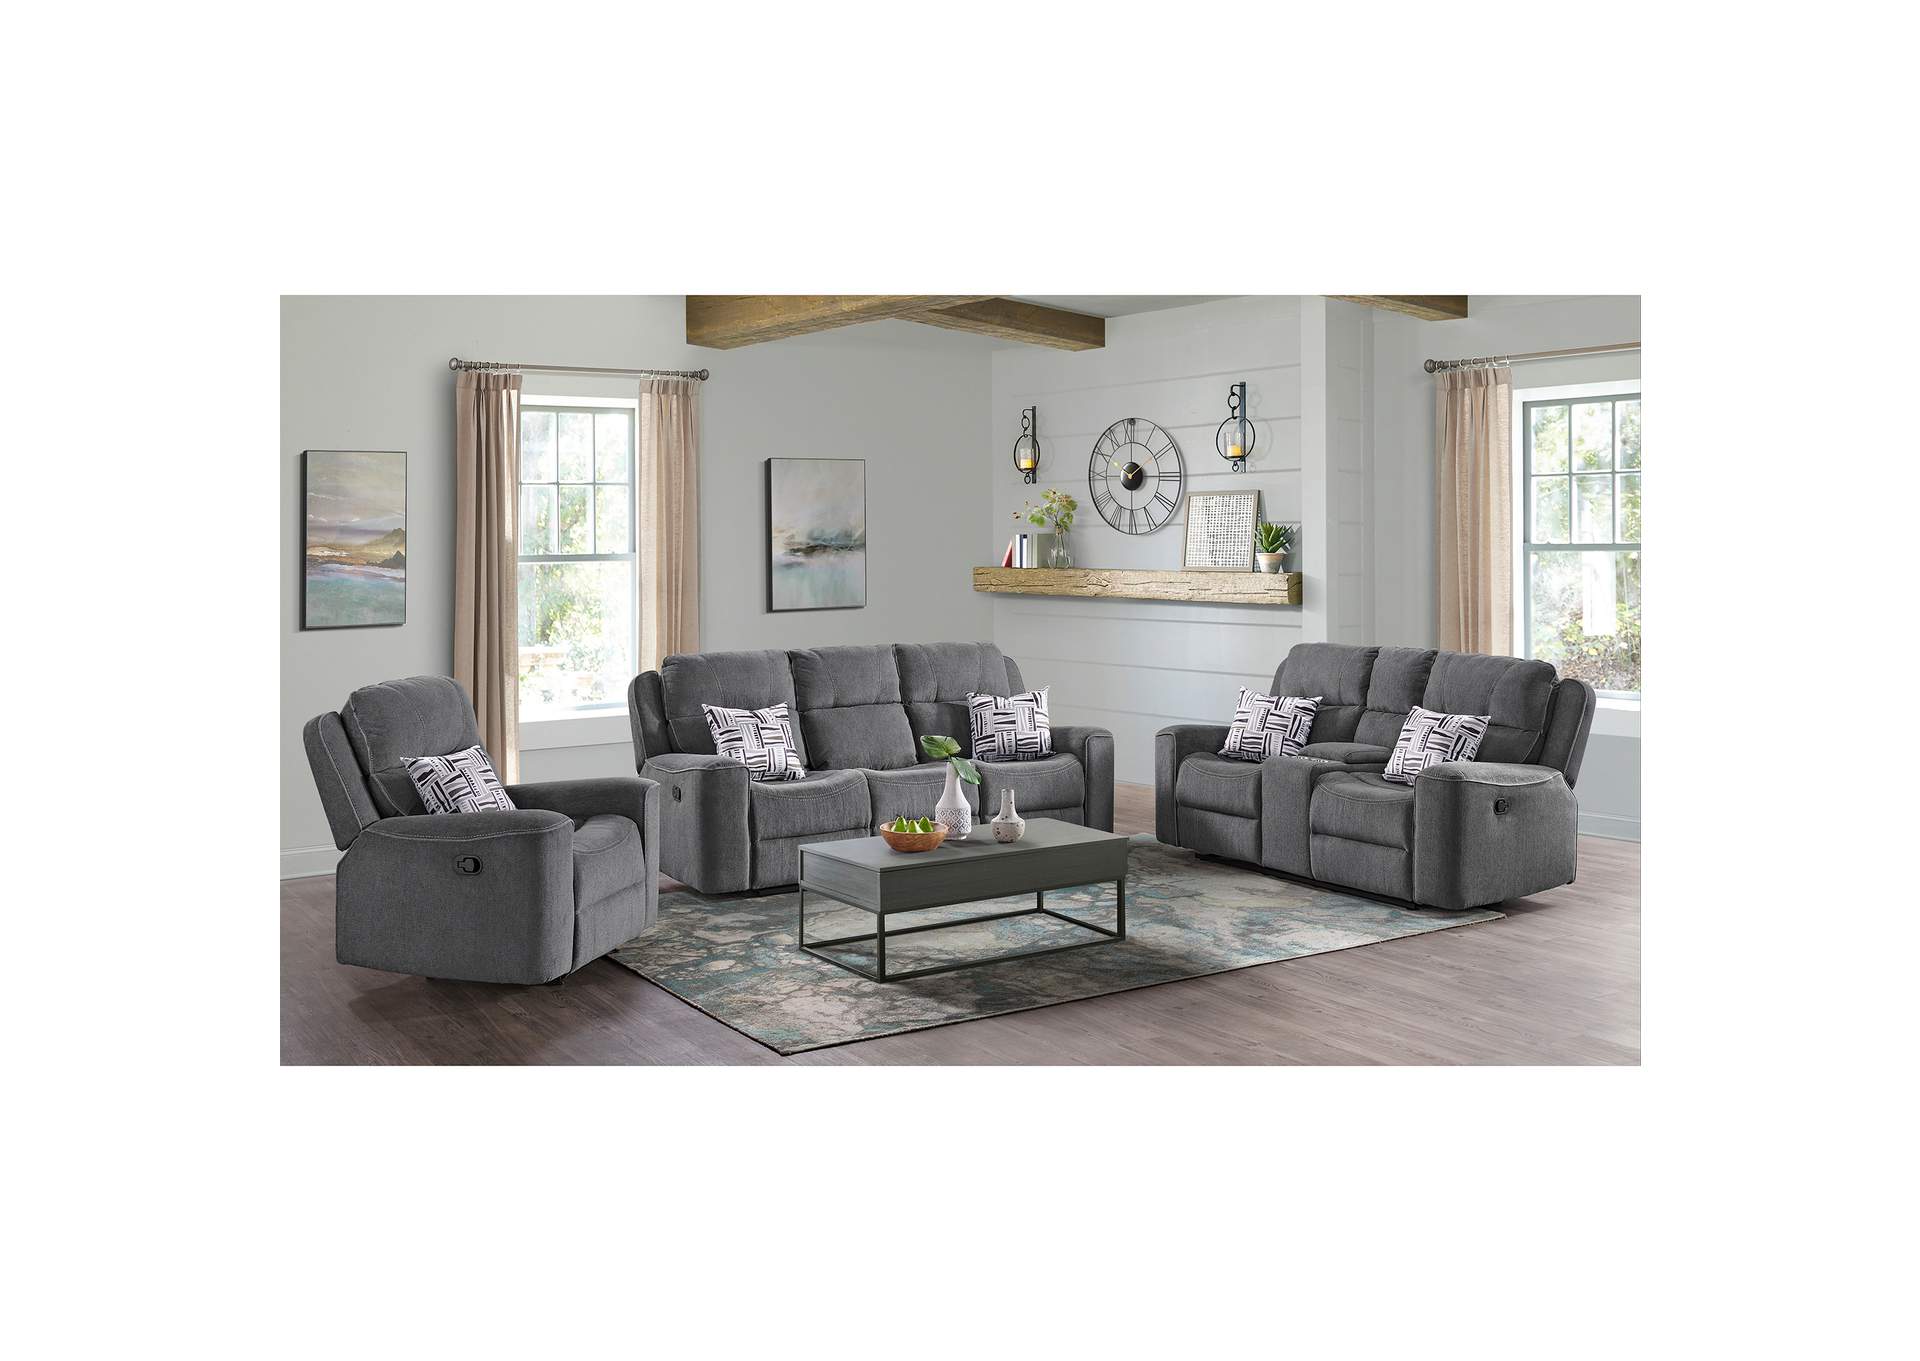 Connery Motion Sofa With Dropdown In Pewter,Elements